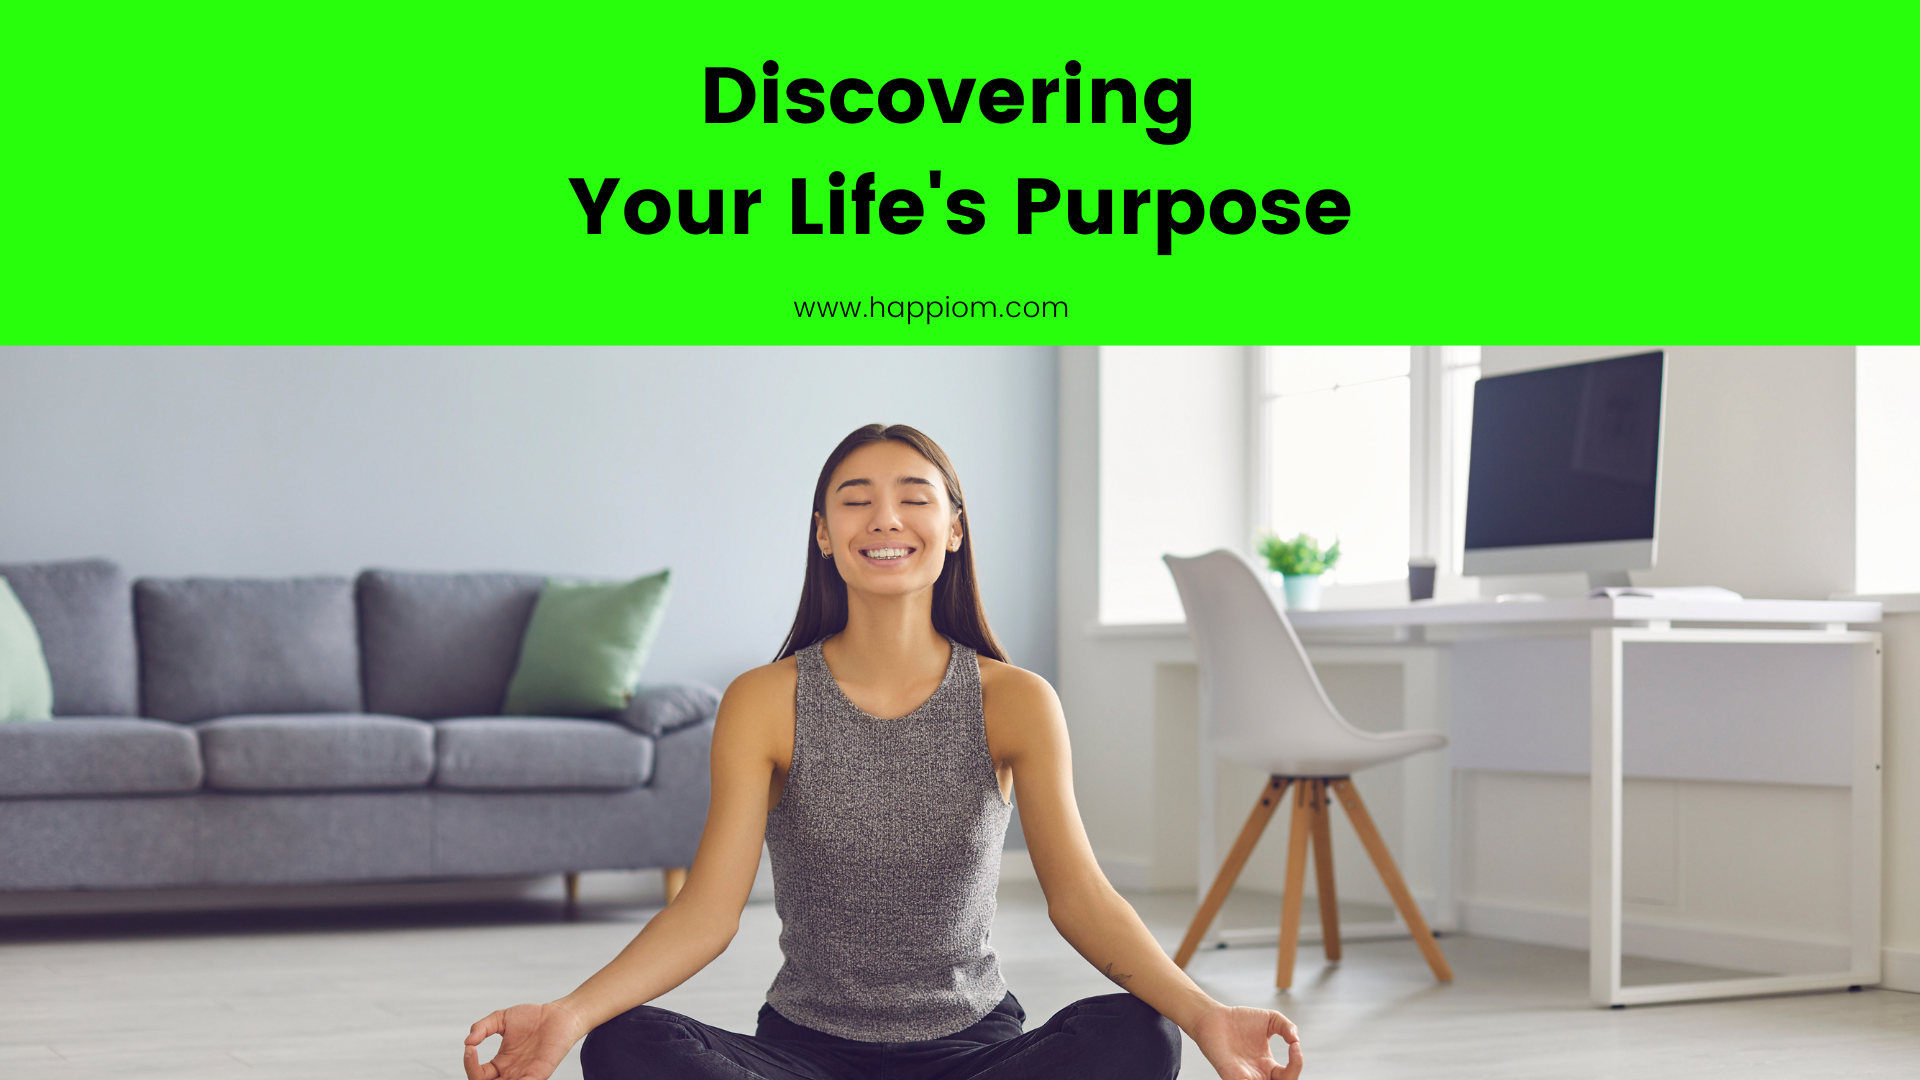 image showing a person working to discover her life purpose